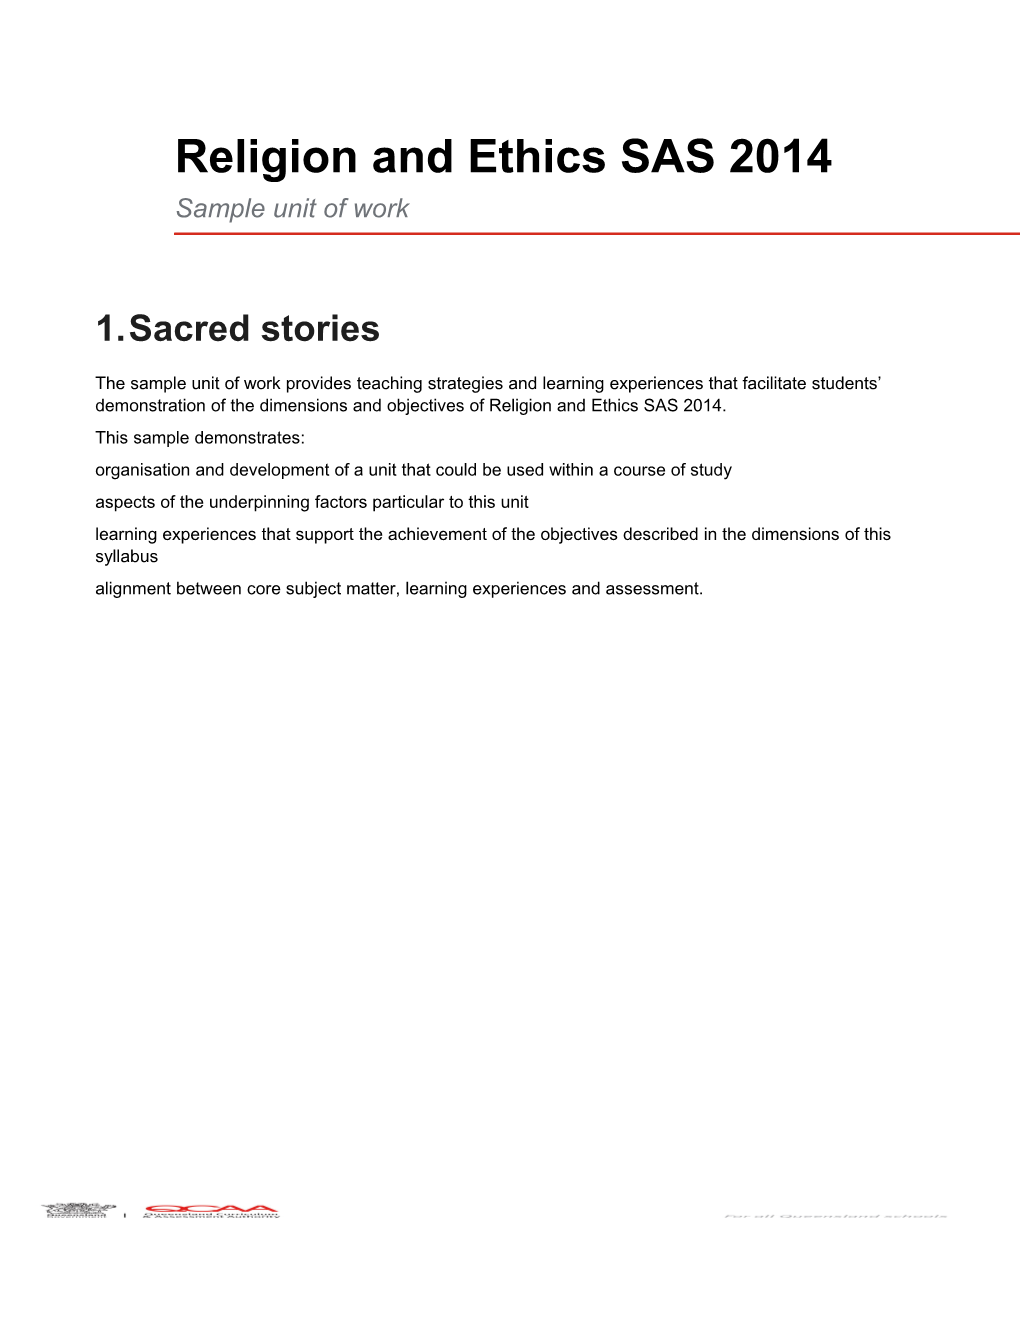 Religion and Ethics SAS (2014) Sample Unit of Work: Sacred Stories